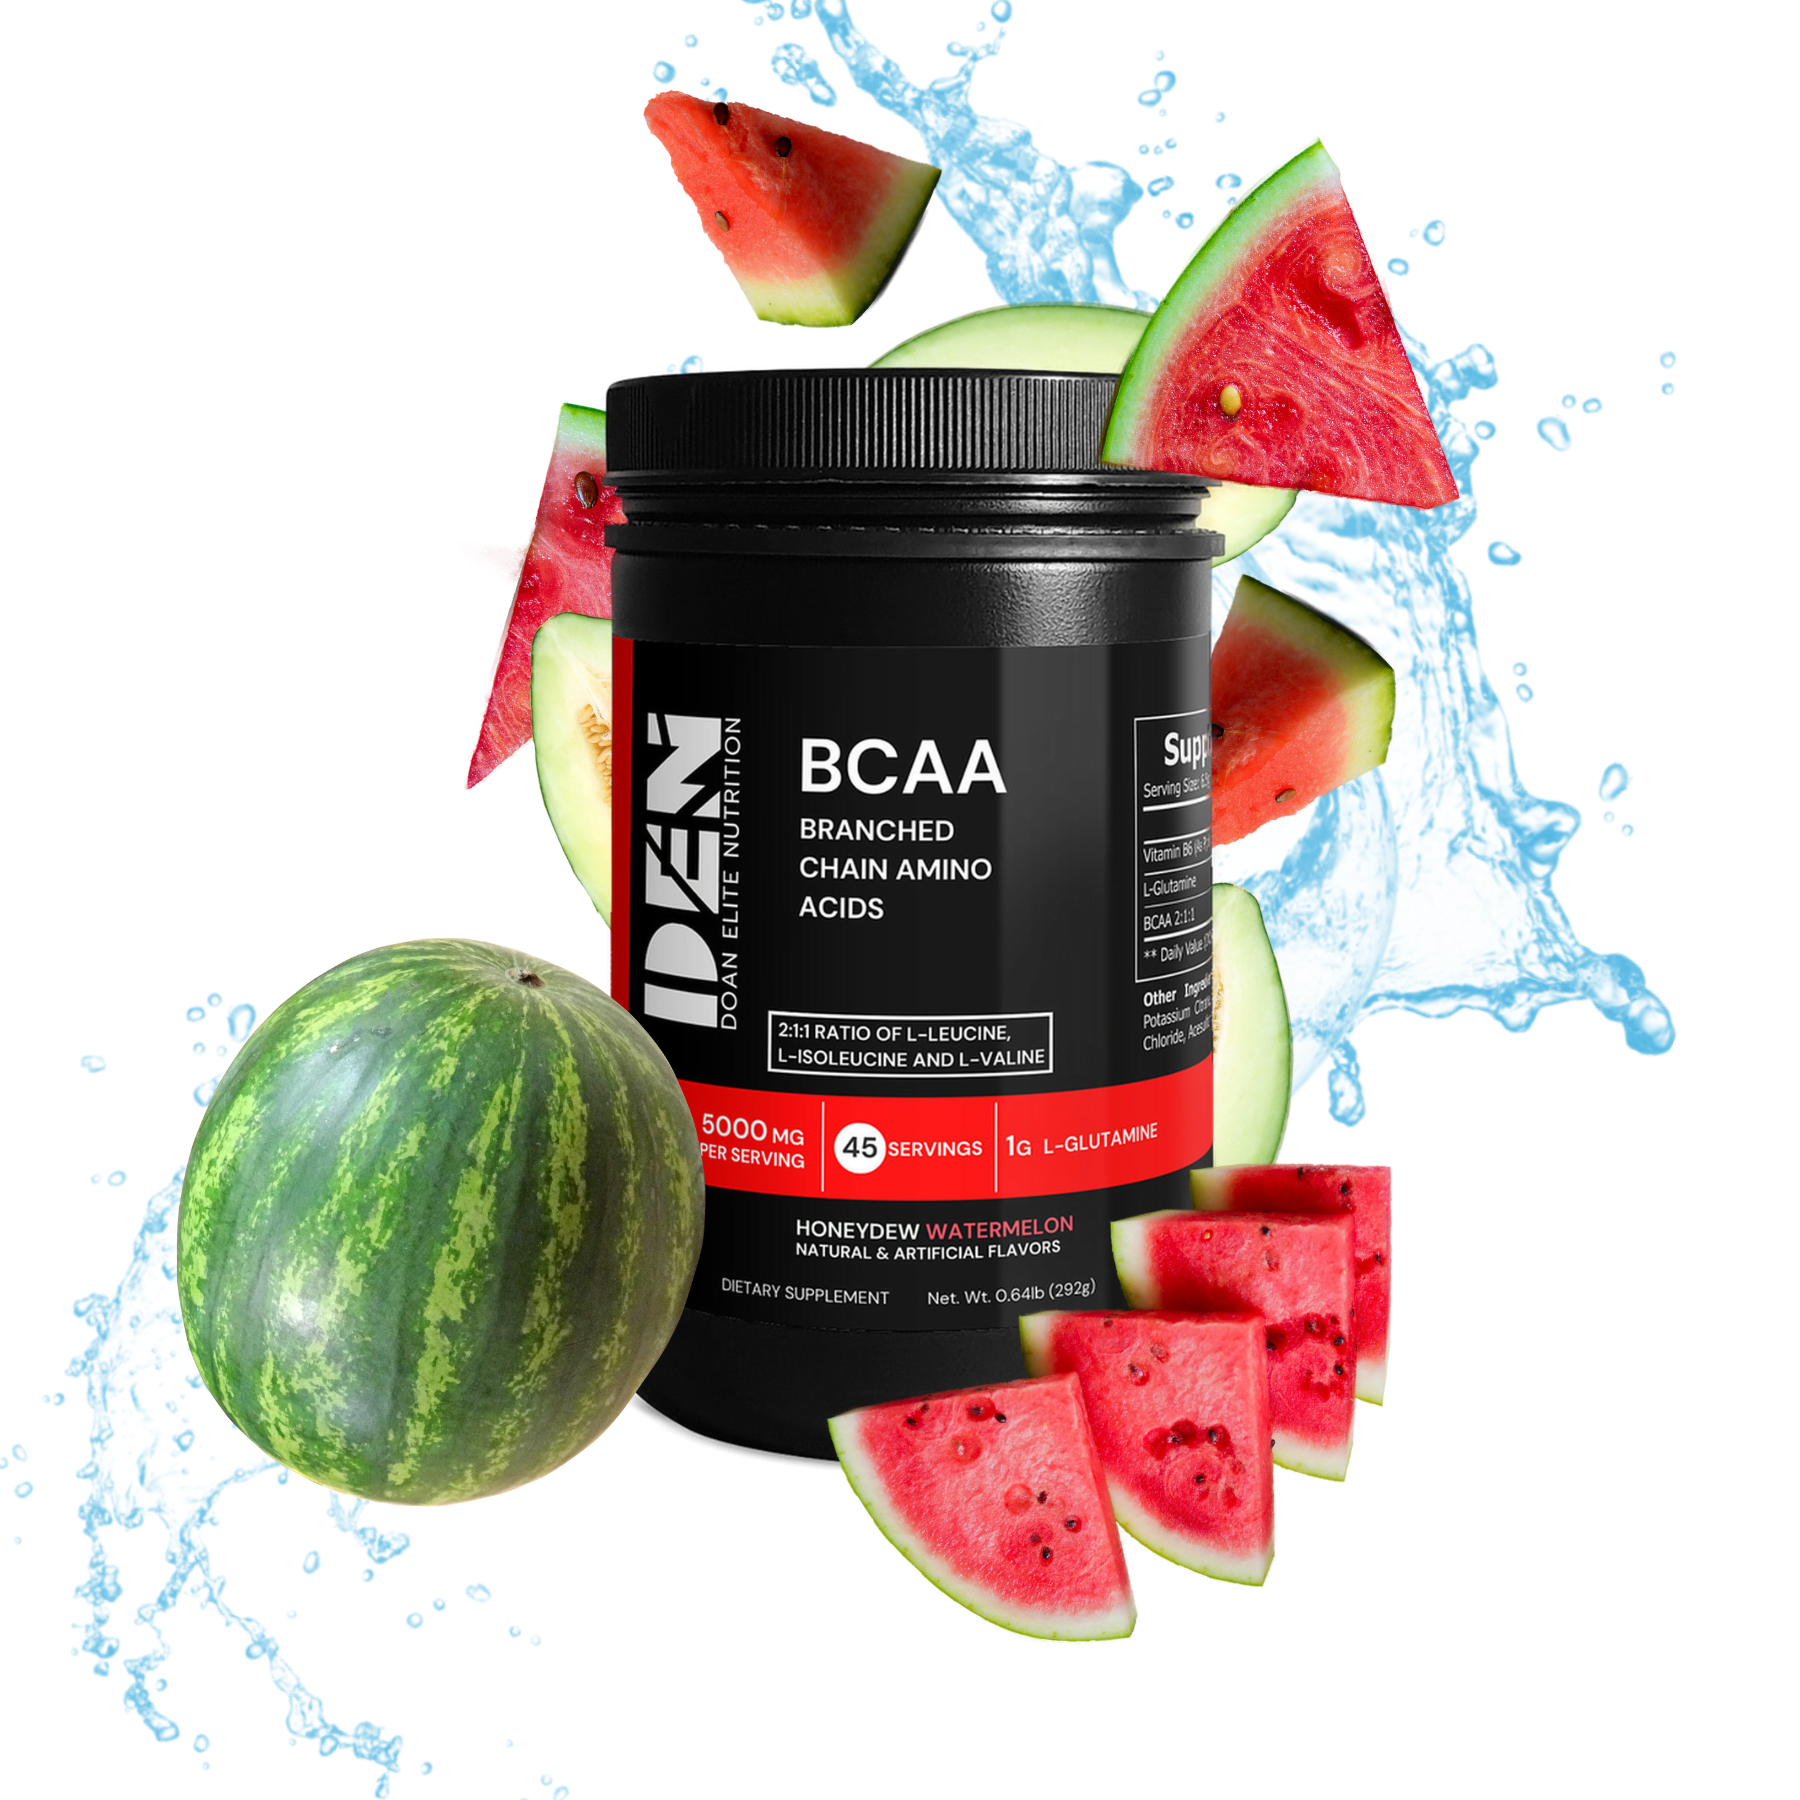 Doan Elite Nutrition BCAA 5000 - the ultimate formula for lean muscle gains, superior athletic performance, and faster recovery. With 5000mg of BCAAs and glutamine, our scientifically-backed blend accelerates recovery and promotes protein synthesis for maximum results.